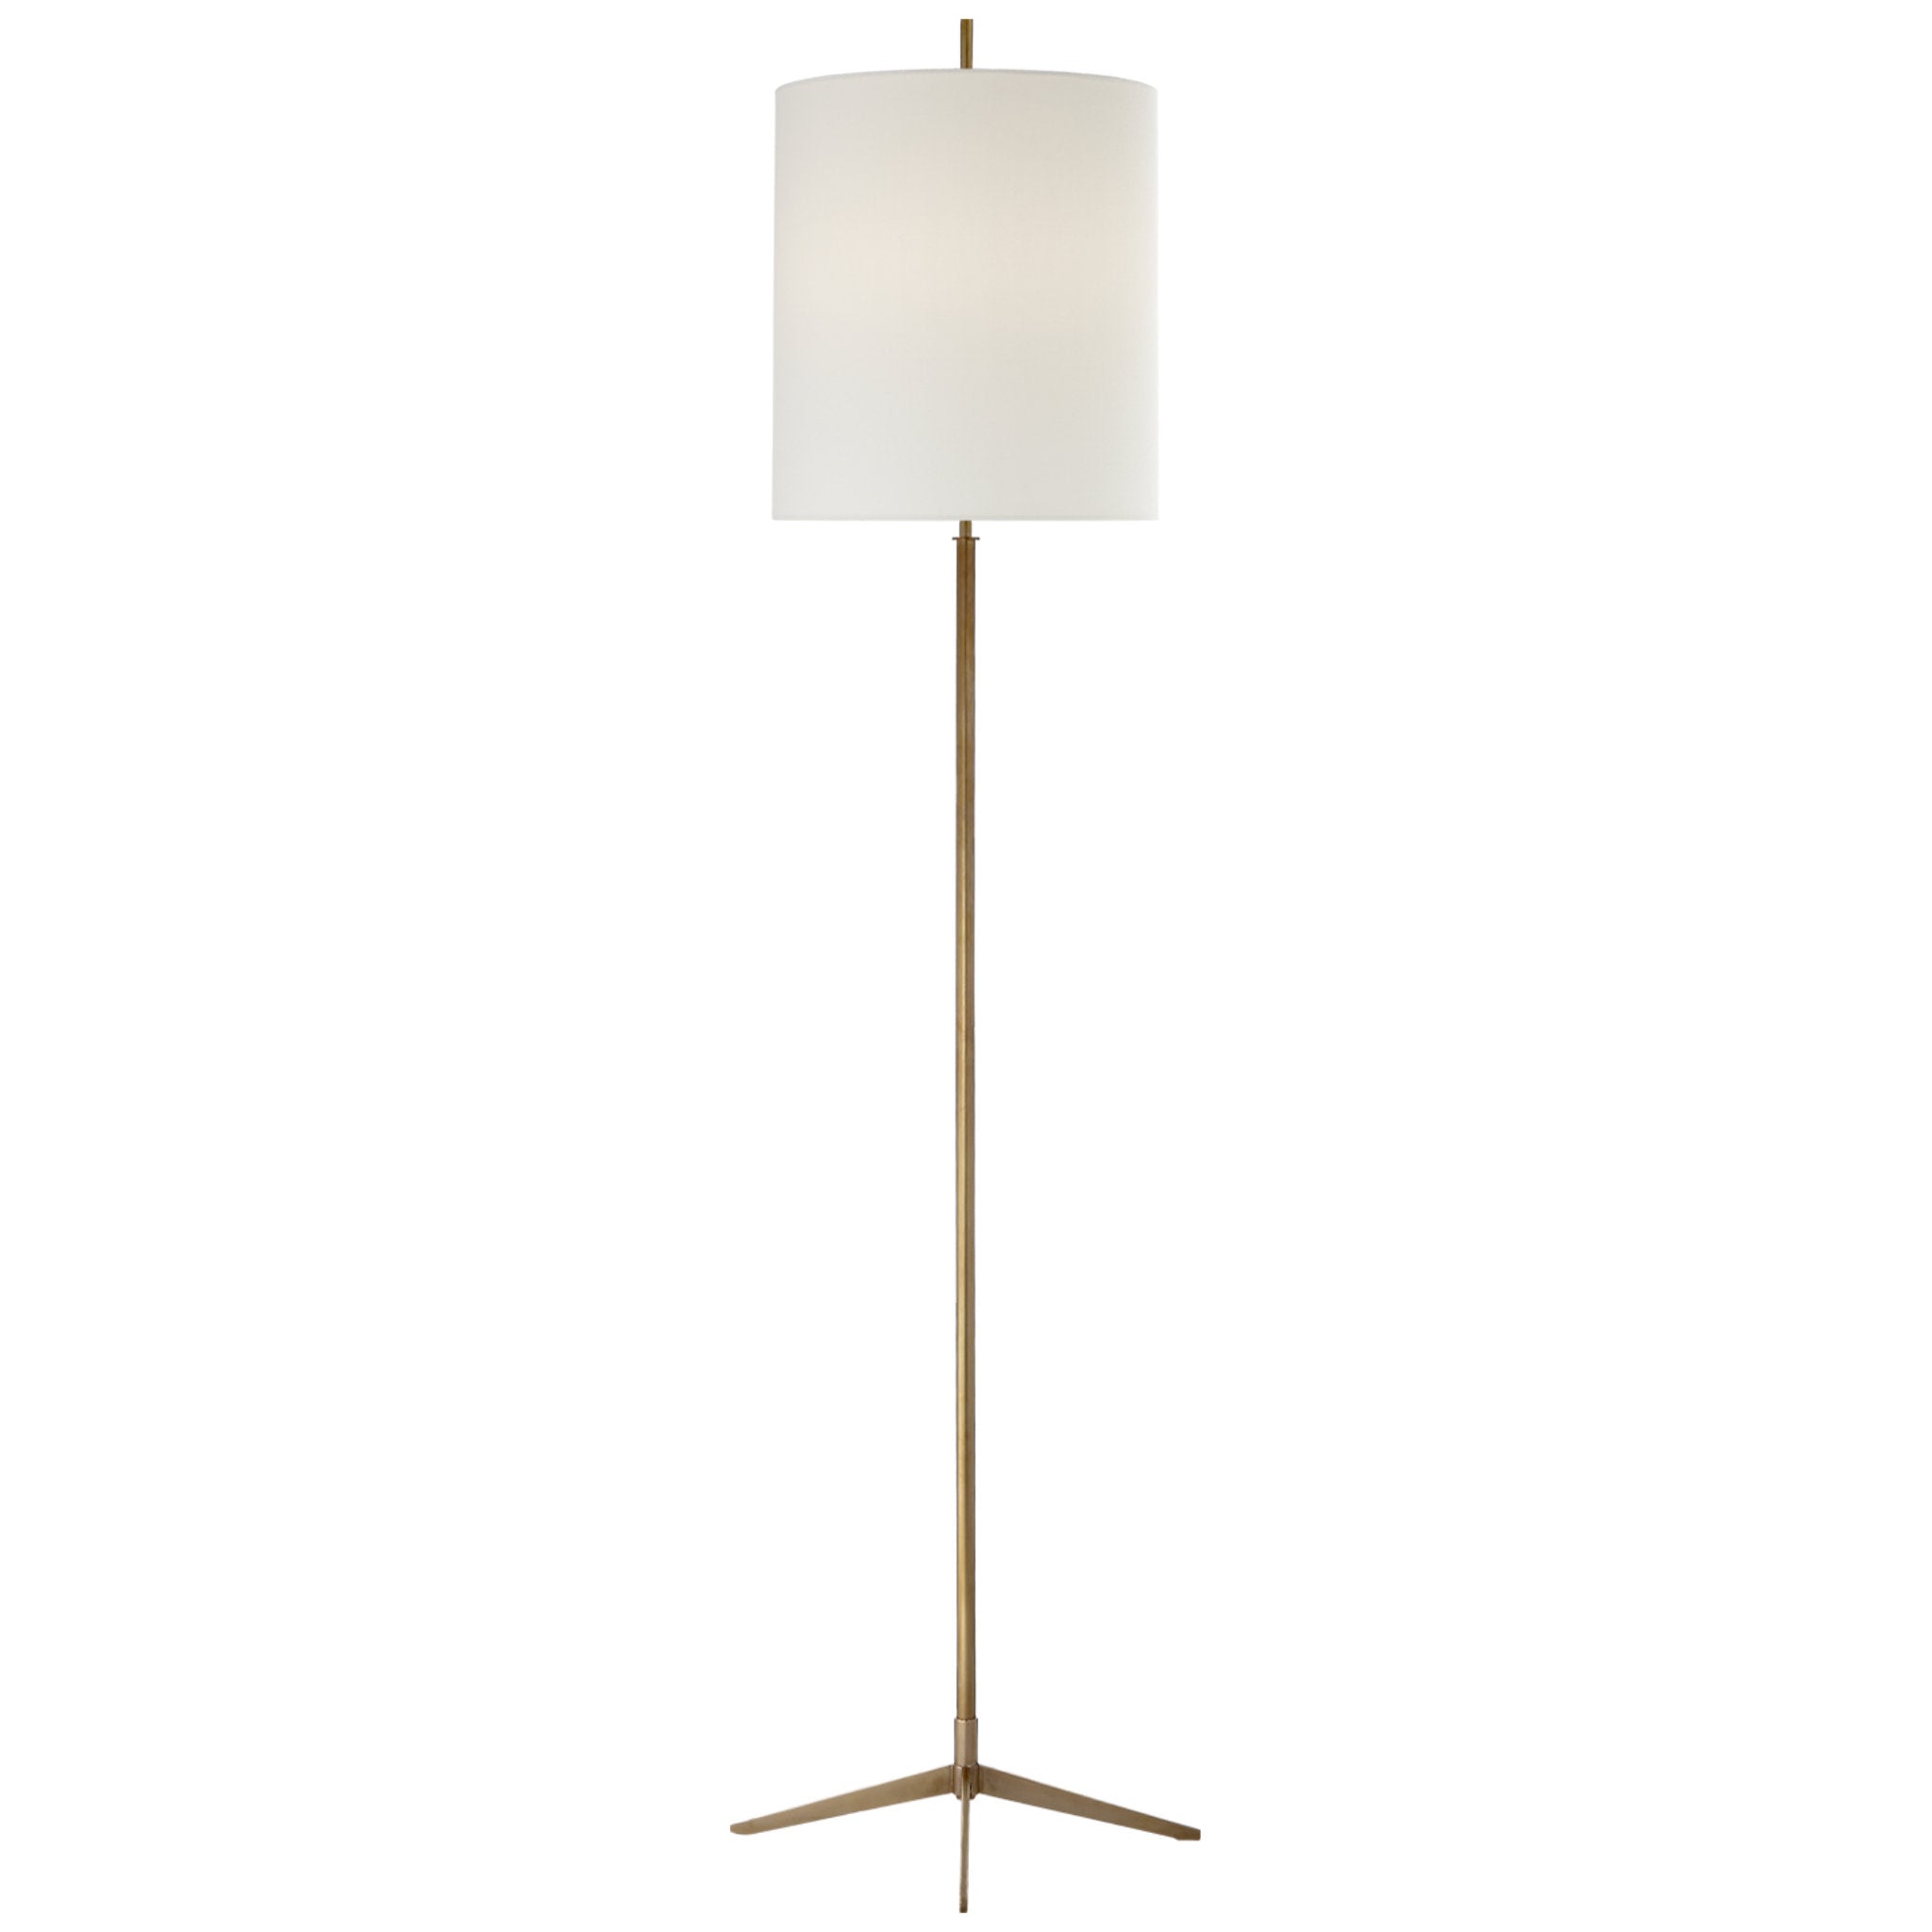 Thomas O'Brien Caron Floor Lamp in Hand-Rubbed Antique Brass with Linen Shade